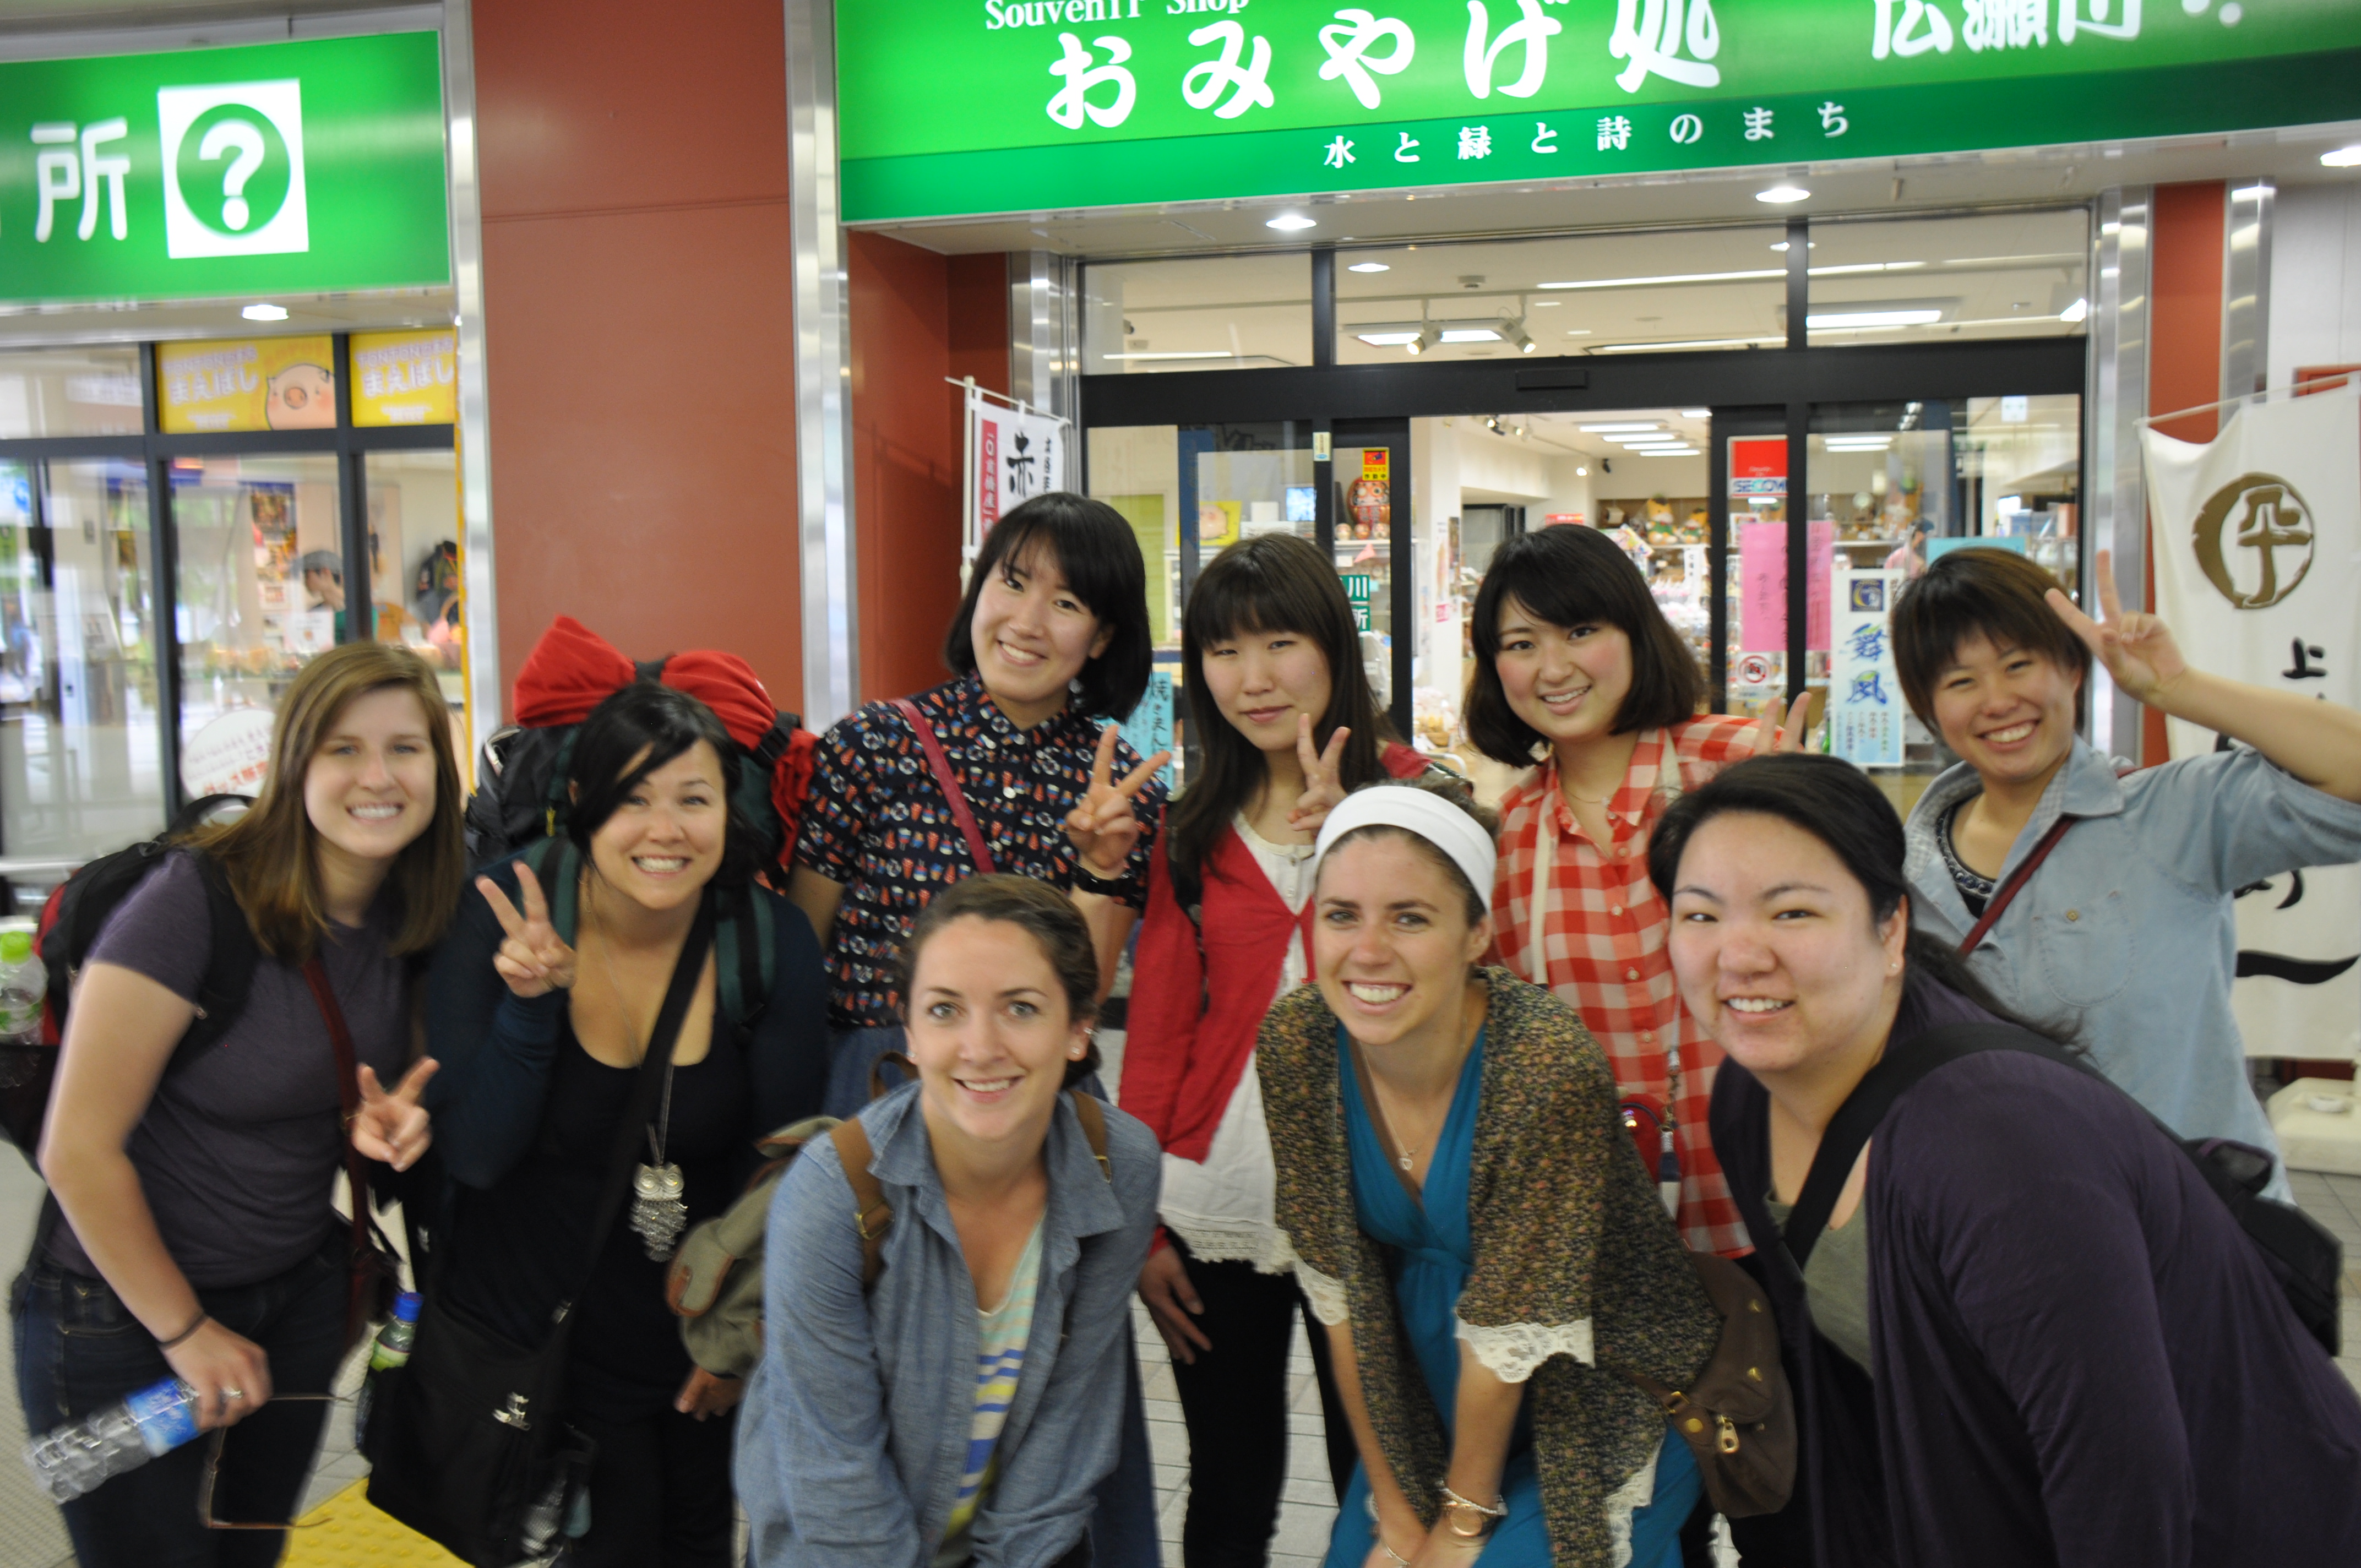 A group photo in Japan